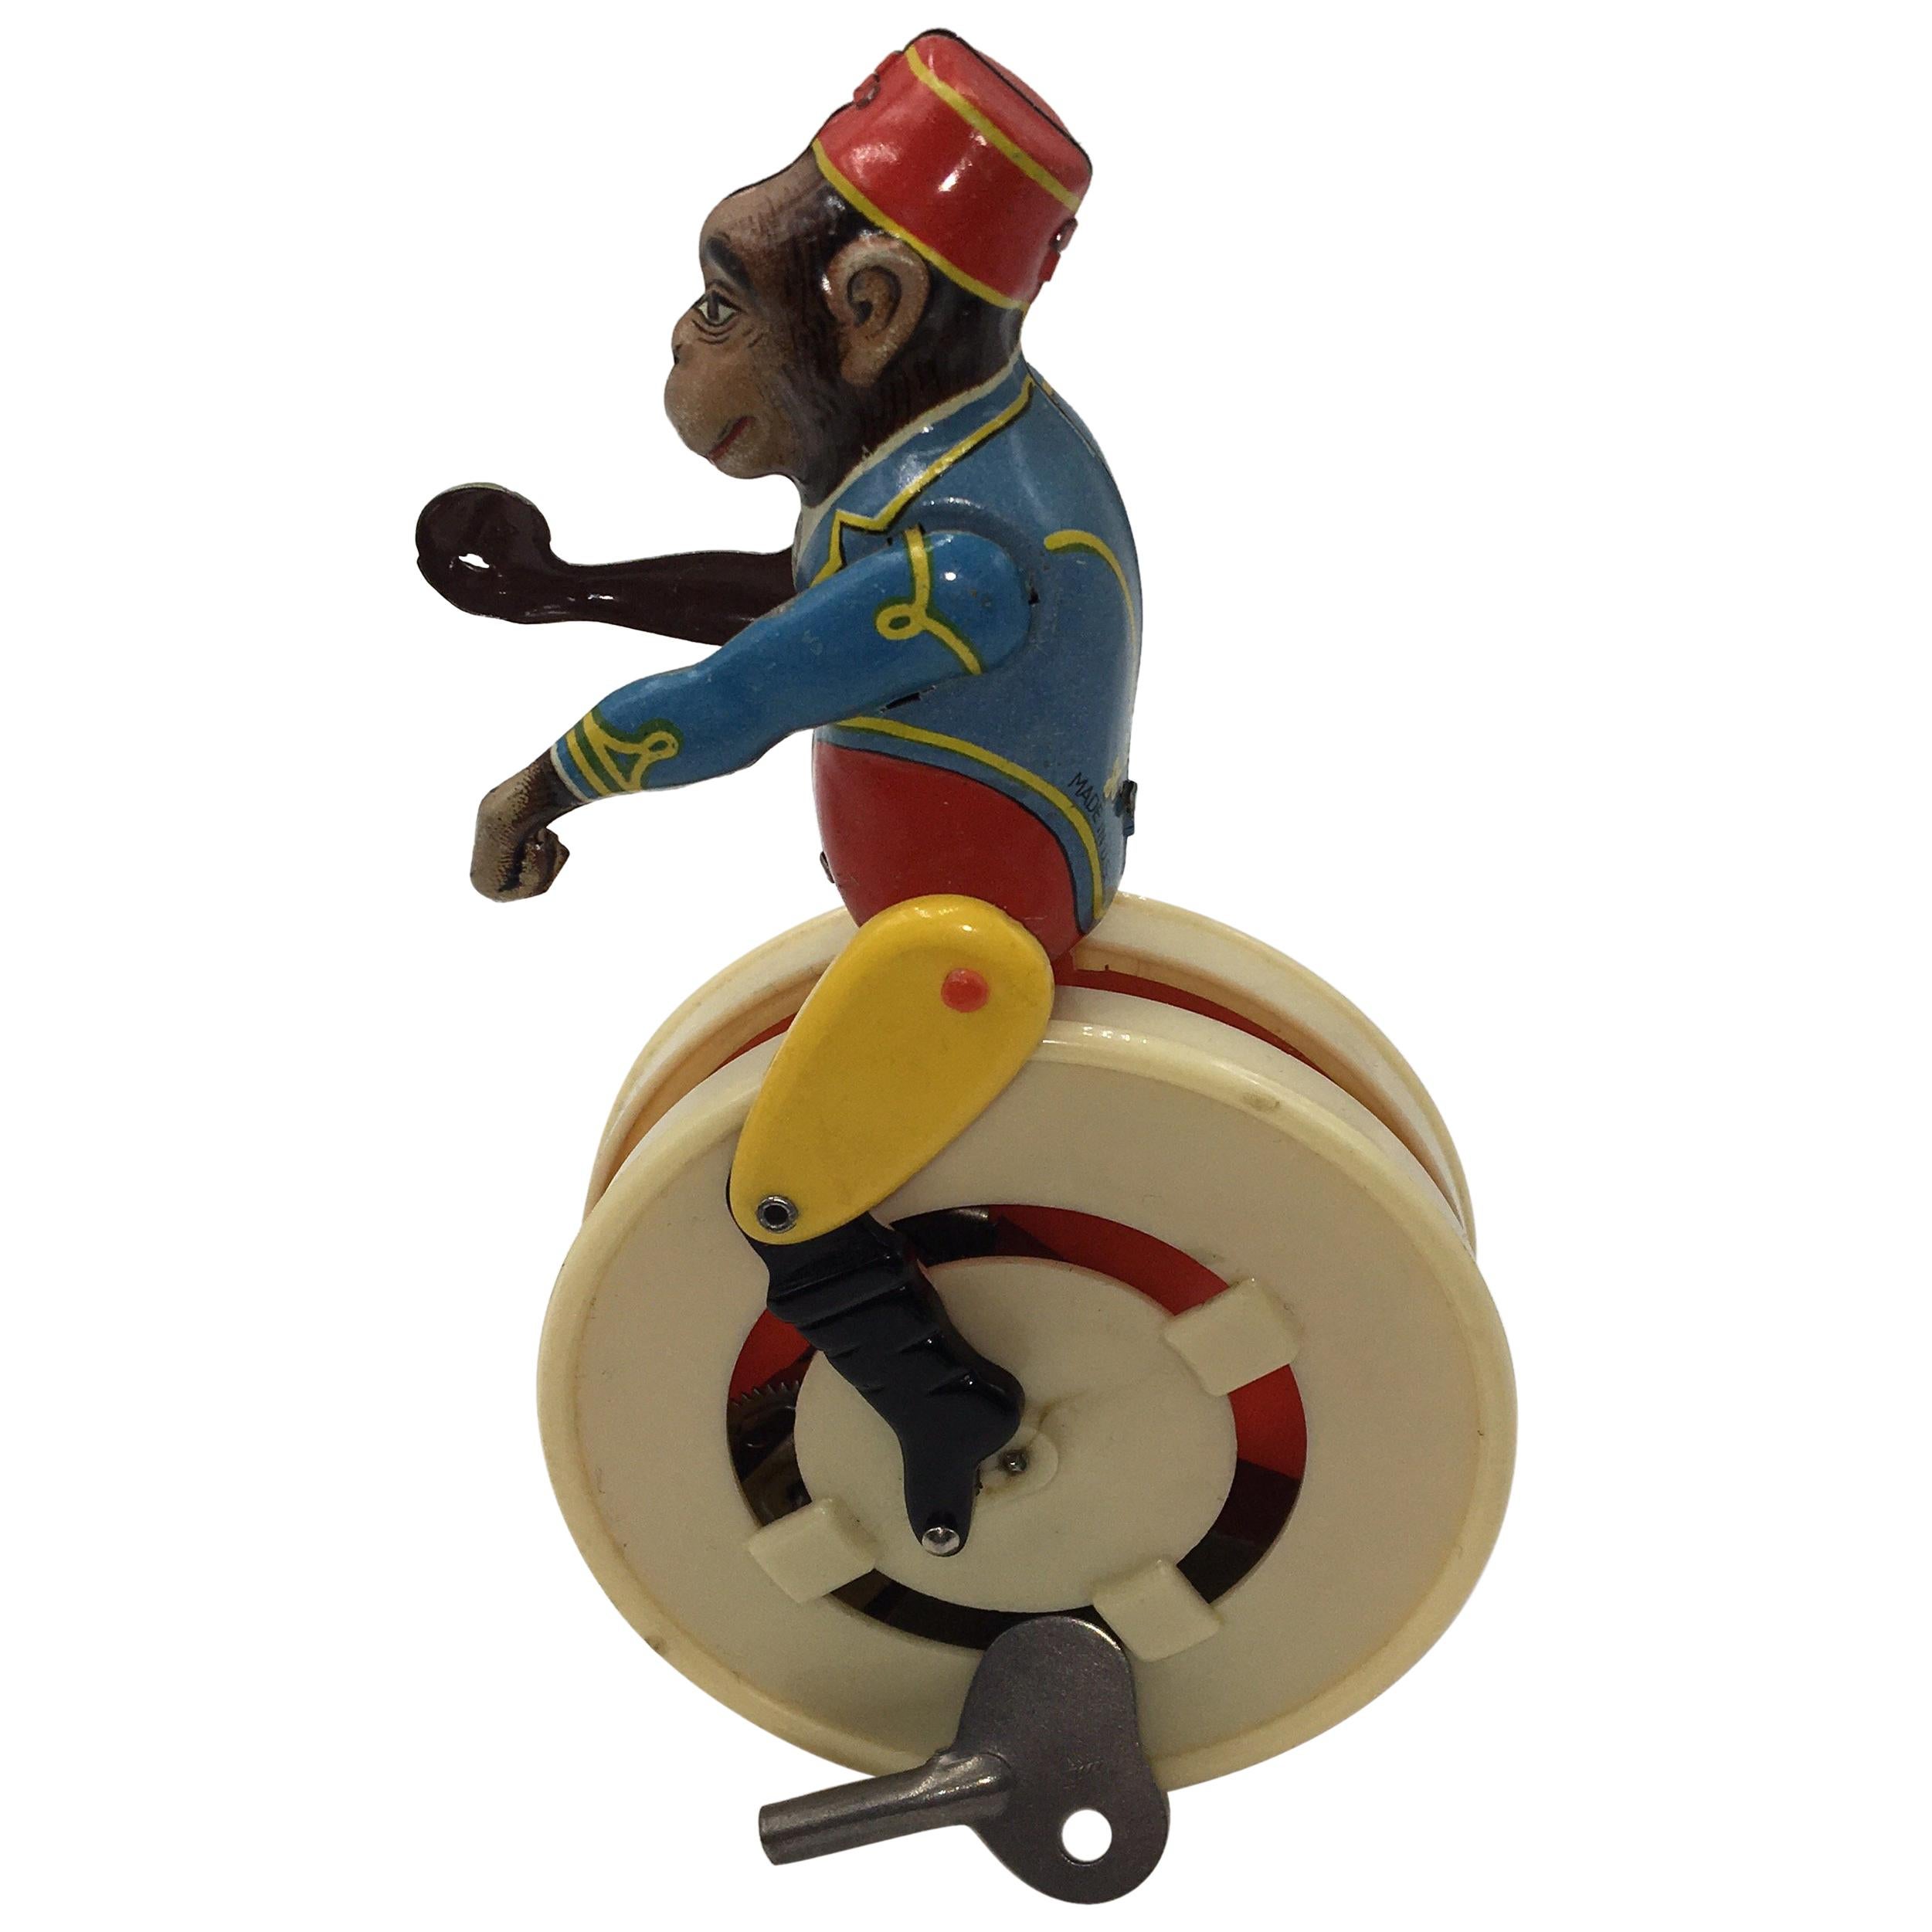 Functional Wind-Up Monkey Toy, U.S. Zone, circa 1950 For Sale